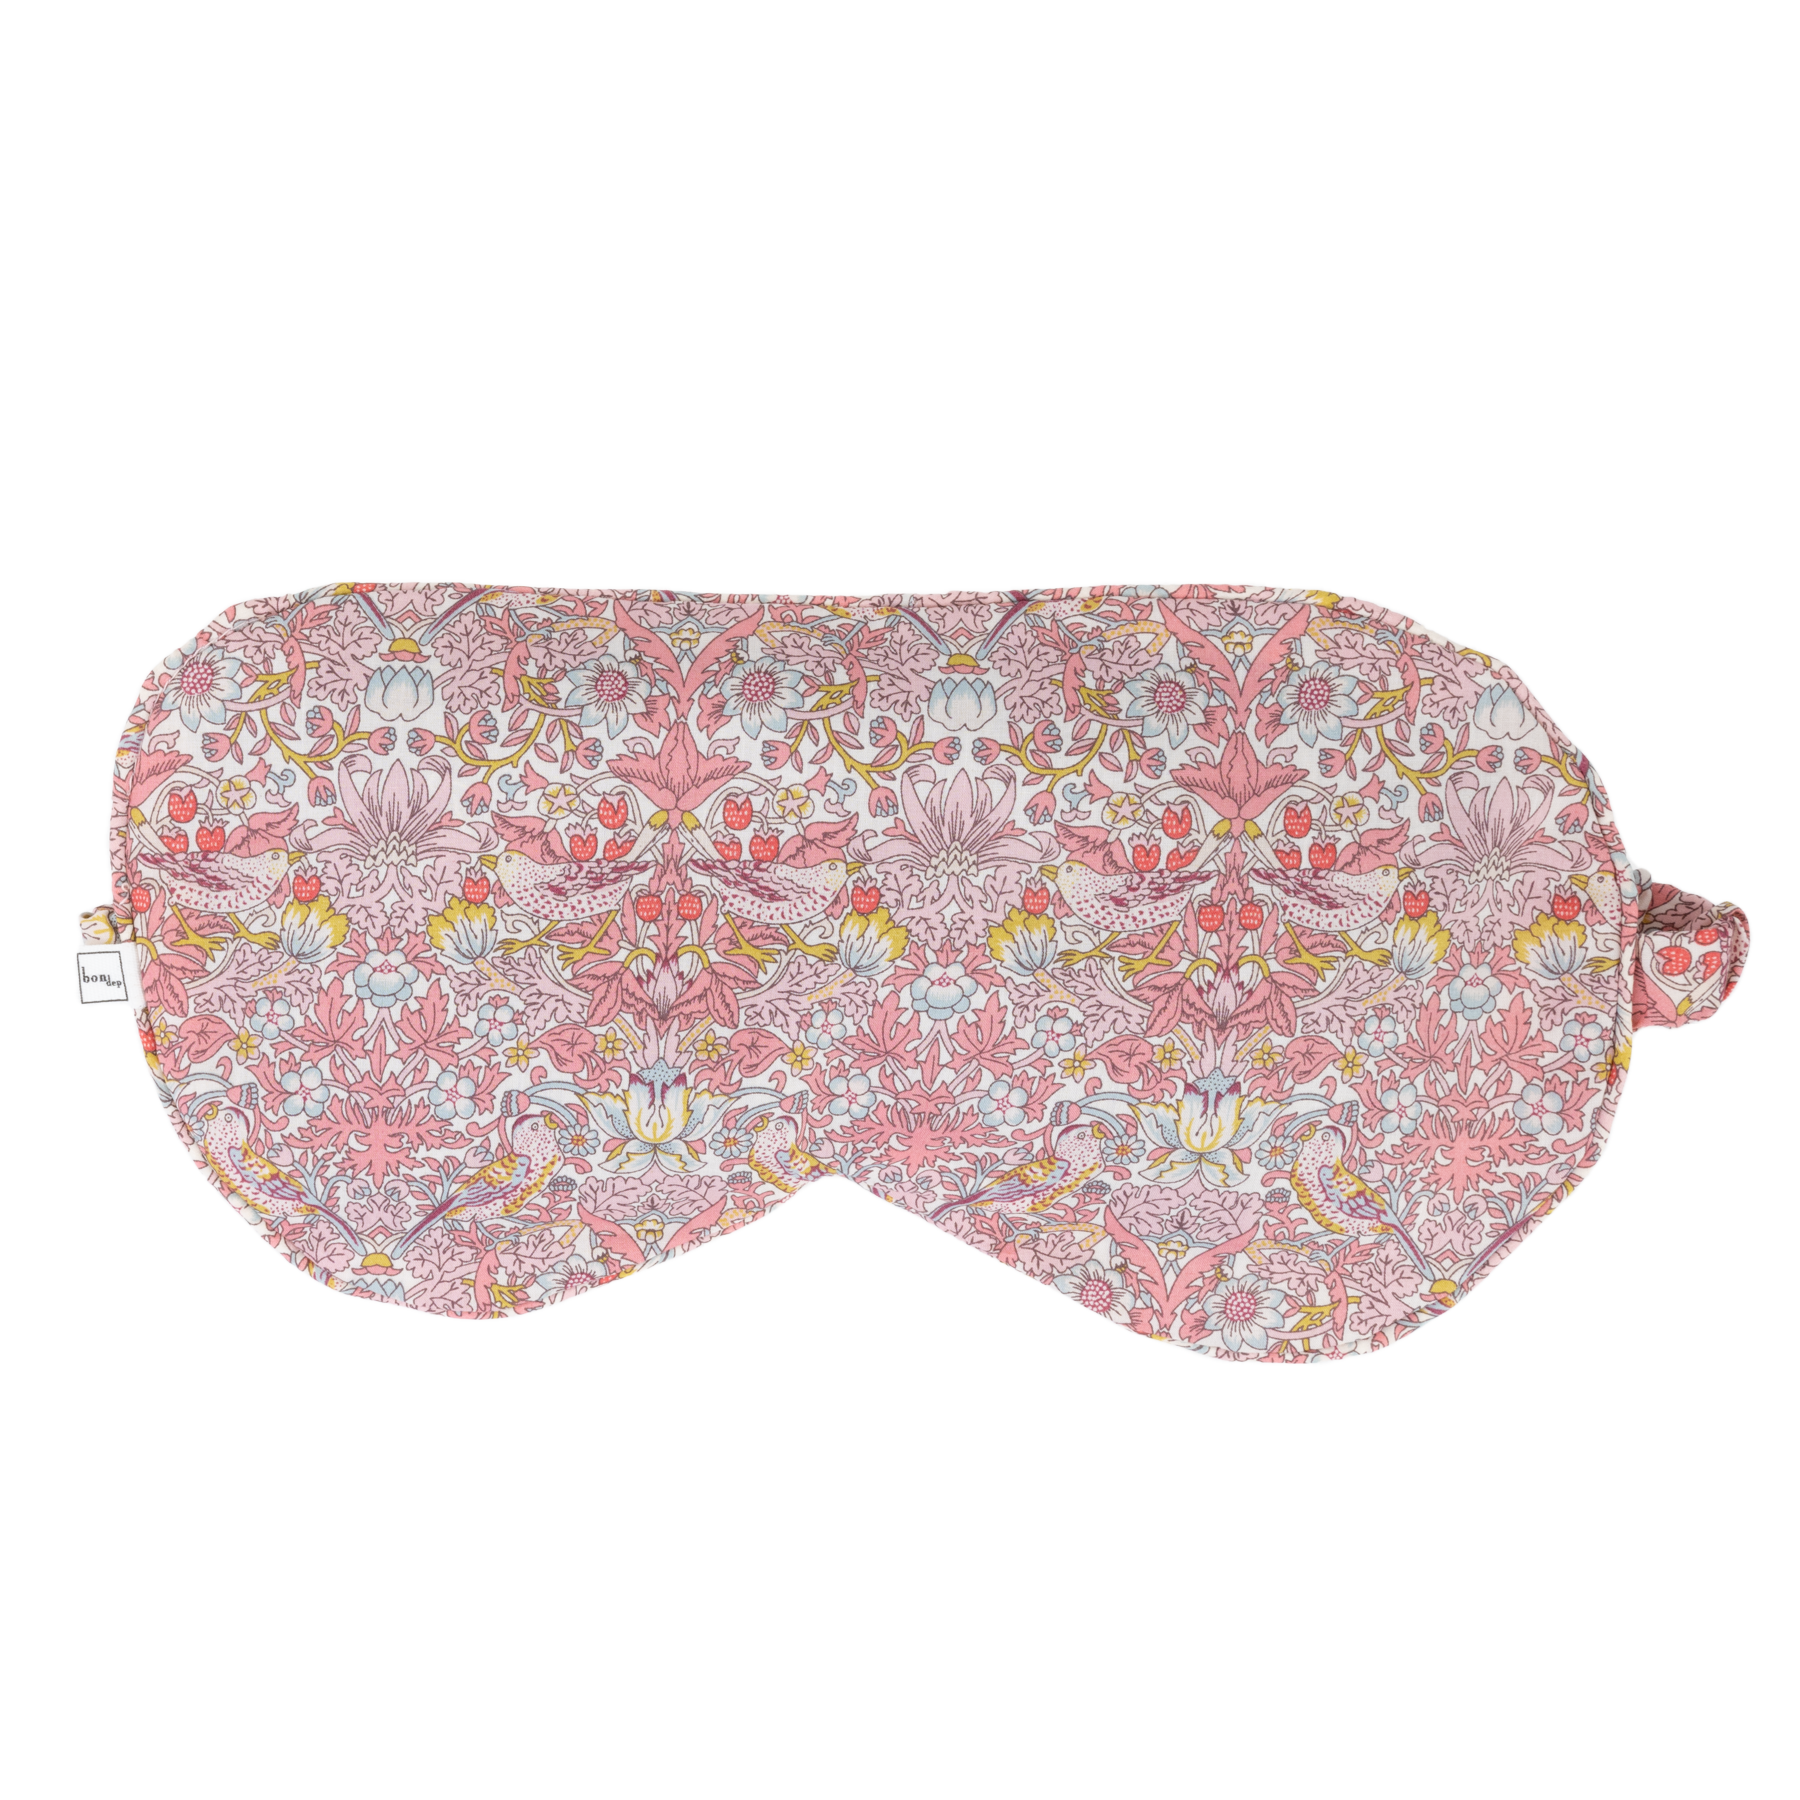 Image of Relaxing Eye masks mw Liberty Strawberry pink from Bon Dep Essentials